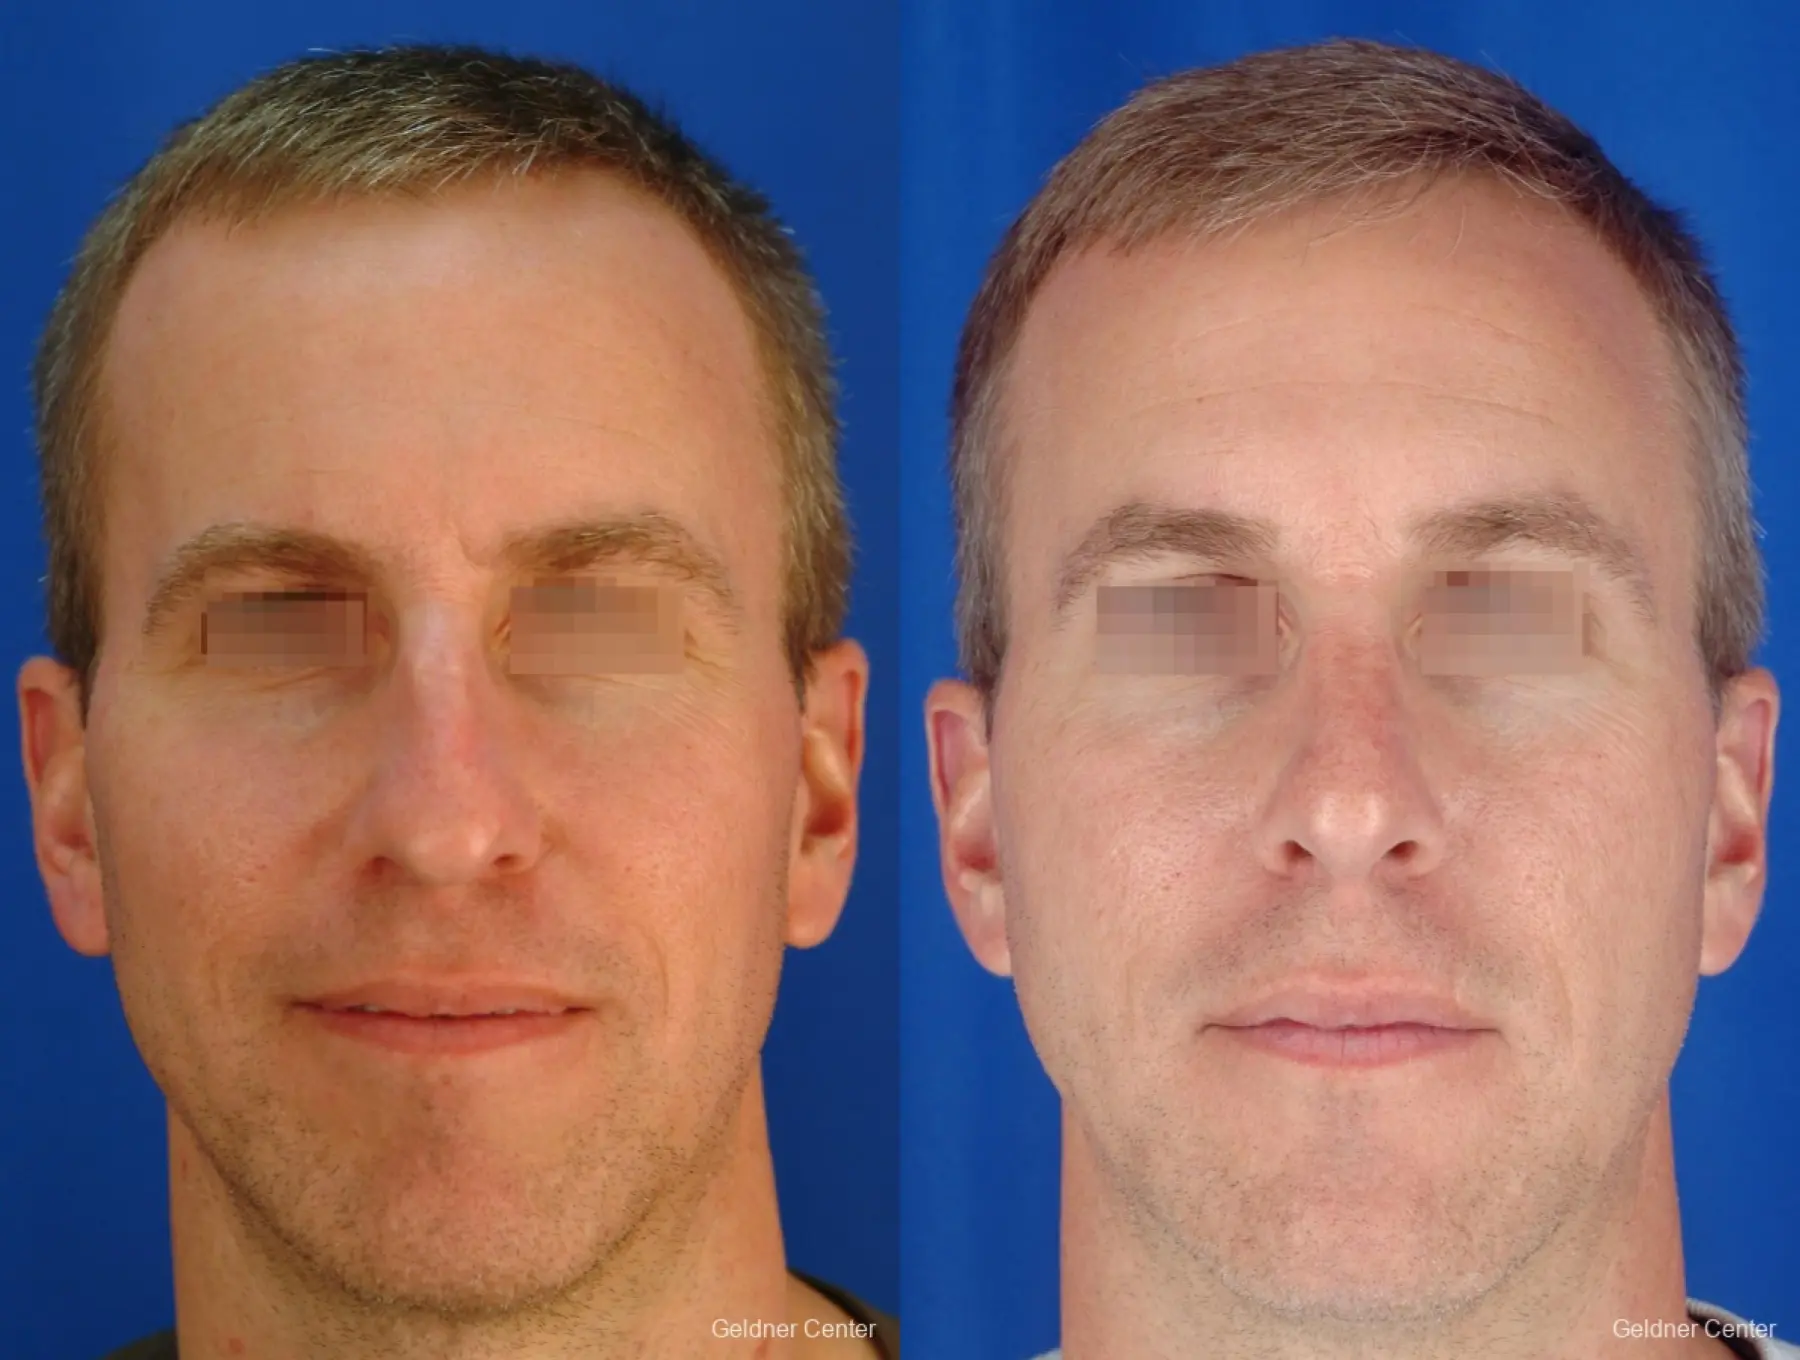 Rhinoplasty For Men: Patient 1 - Before and After 1